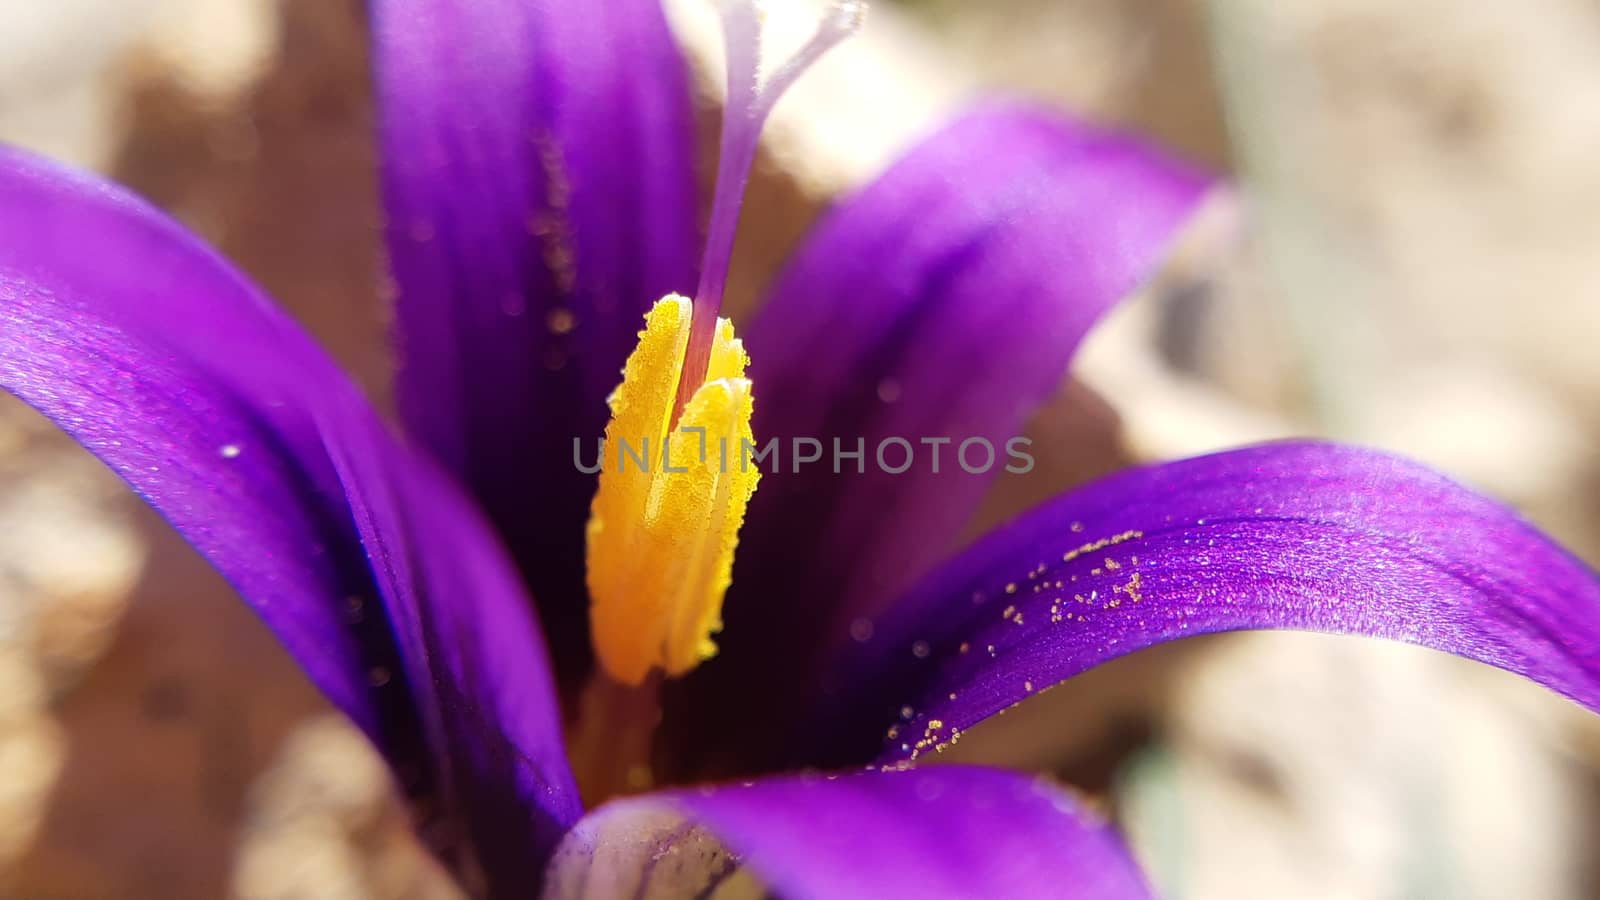 Close-up and detail of two crocus flowers opening up. Purple leaves and yellow pistil. by kb79